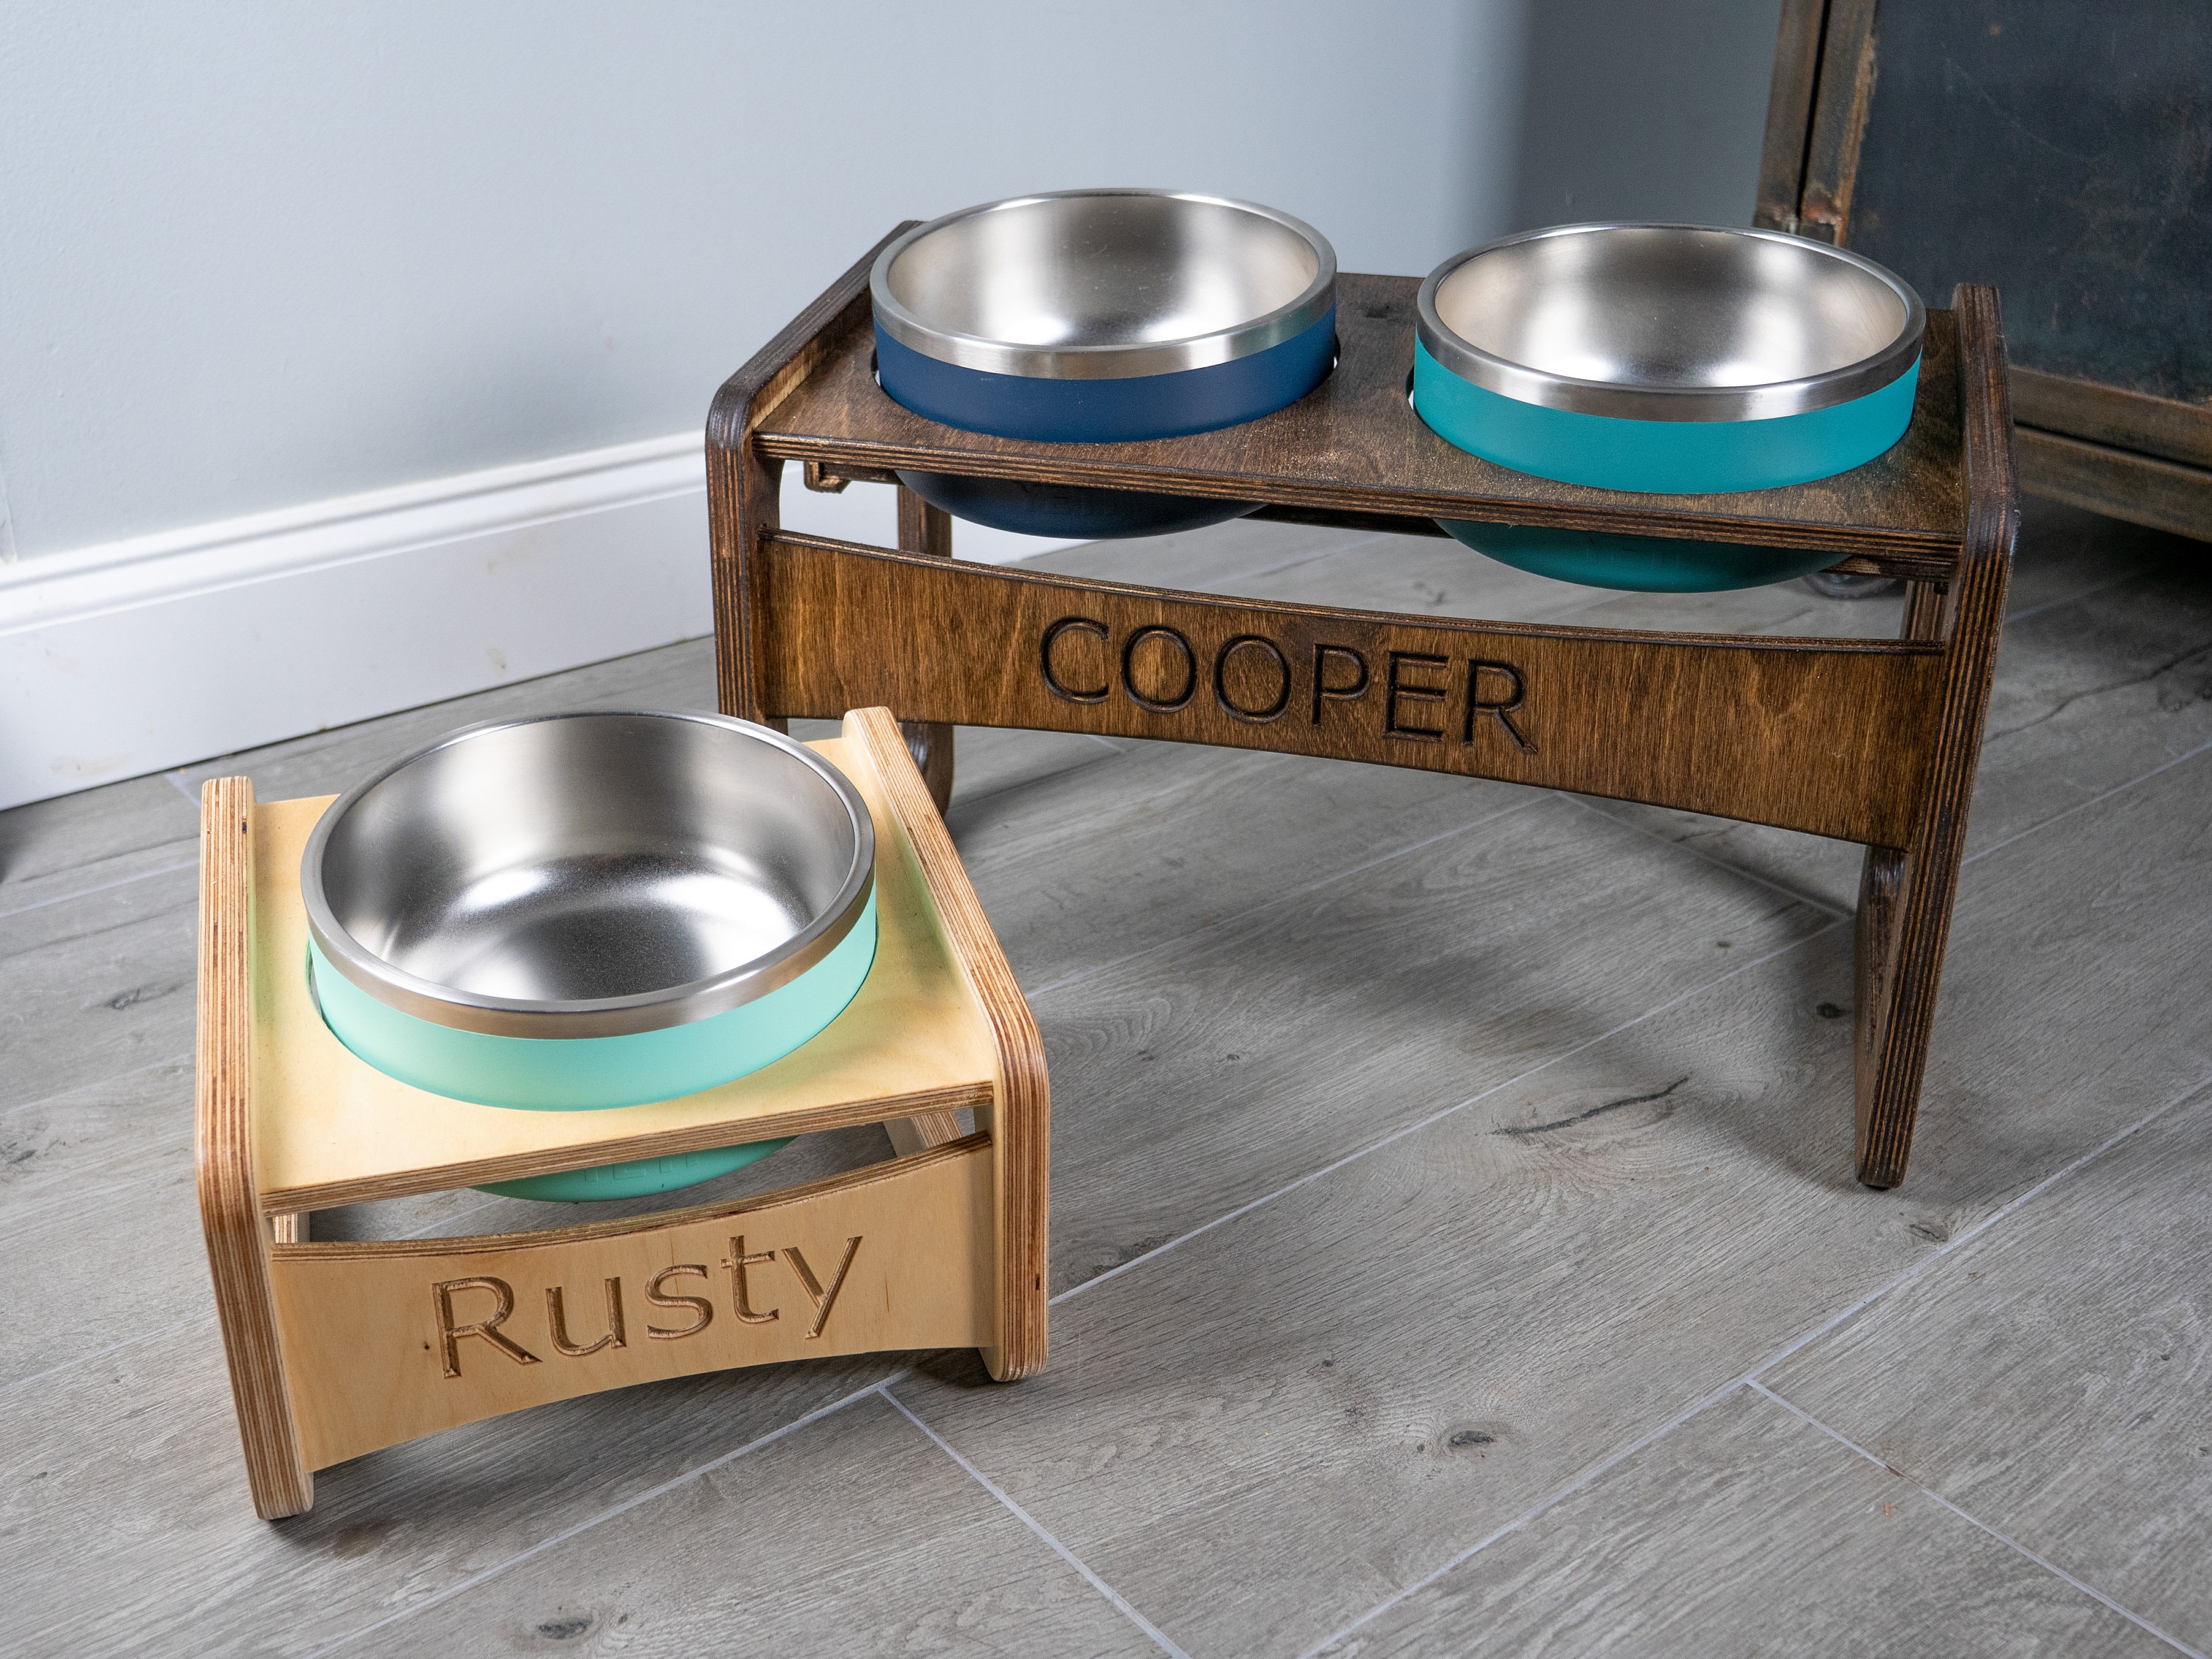 Personalized RTIC Dog Bowl Small - Color